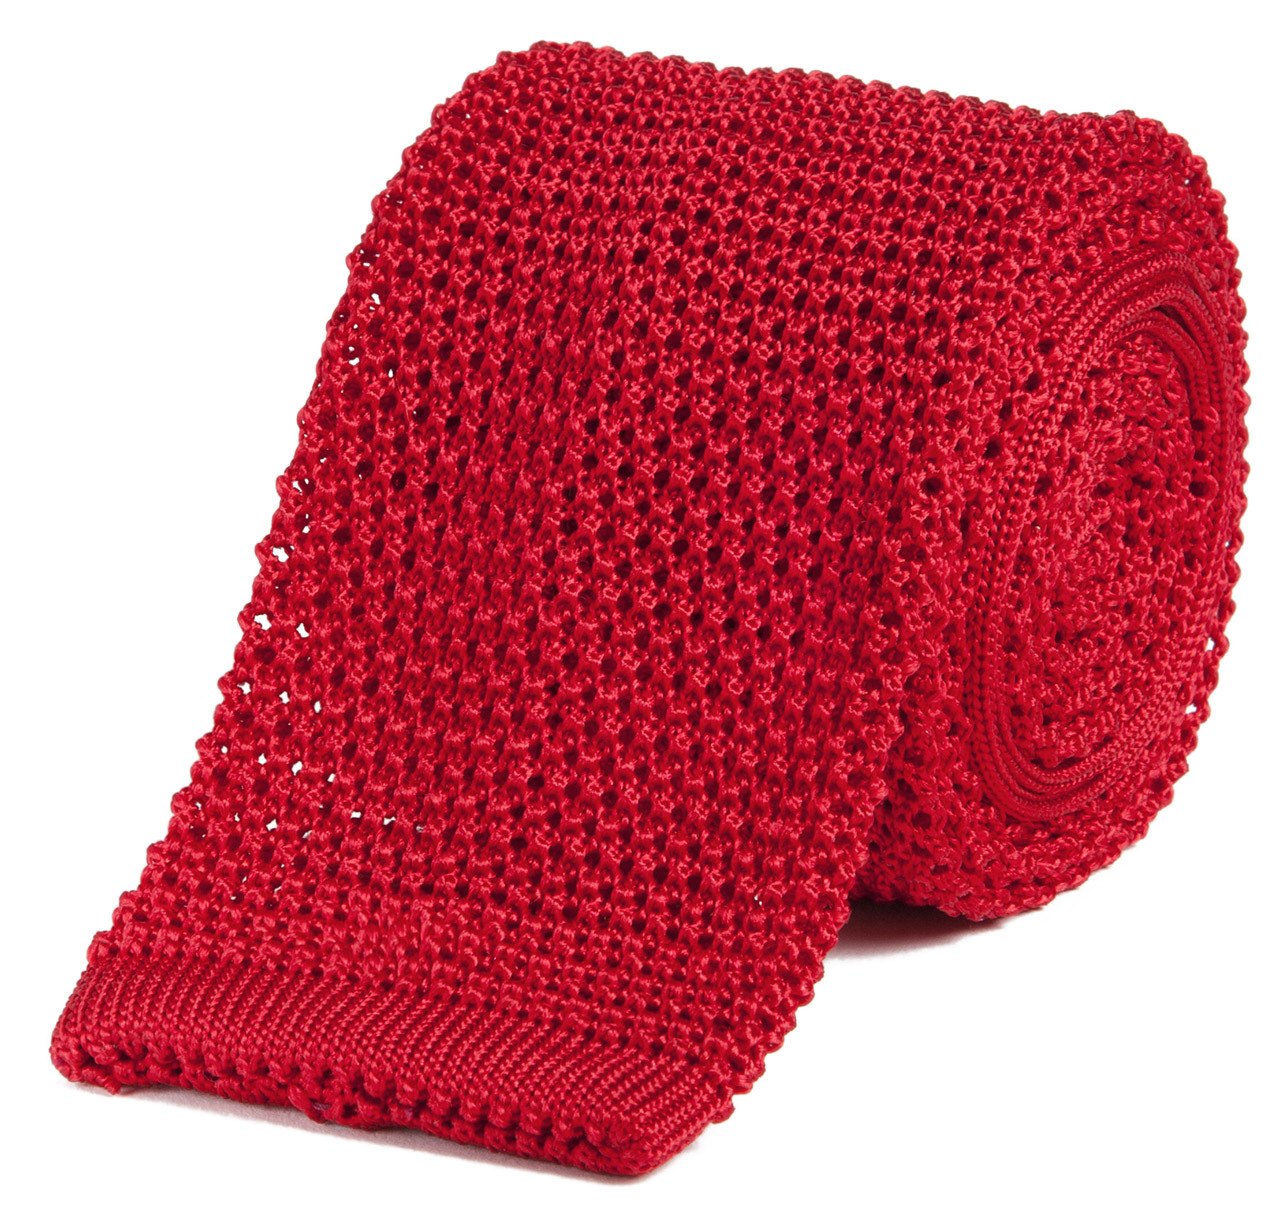 Sir Jack's Classic Knit Silk Tie in Fire Engine Red